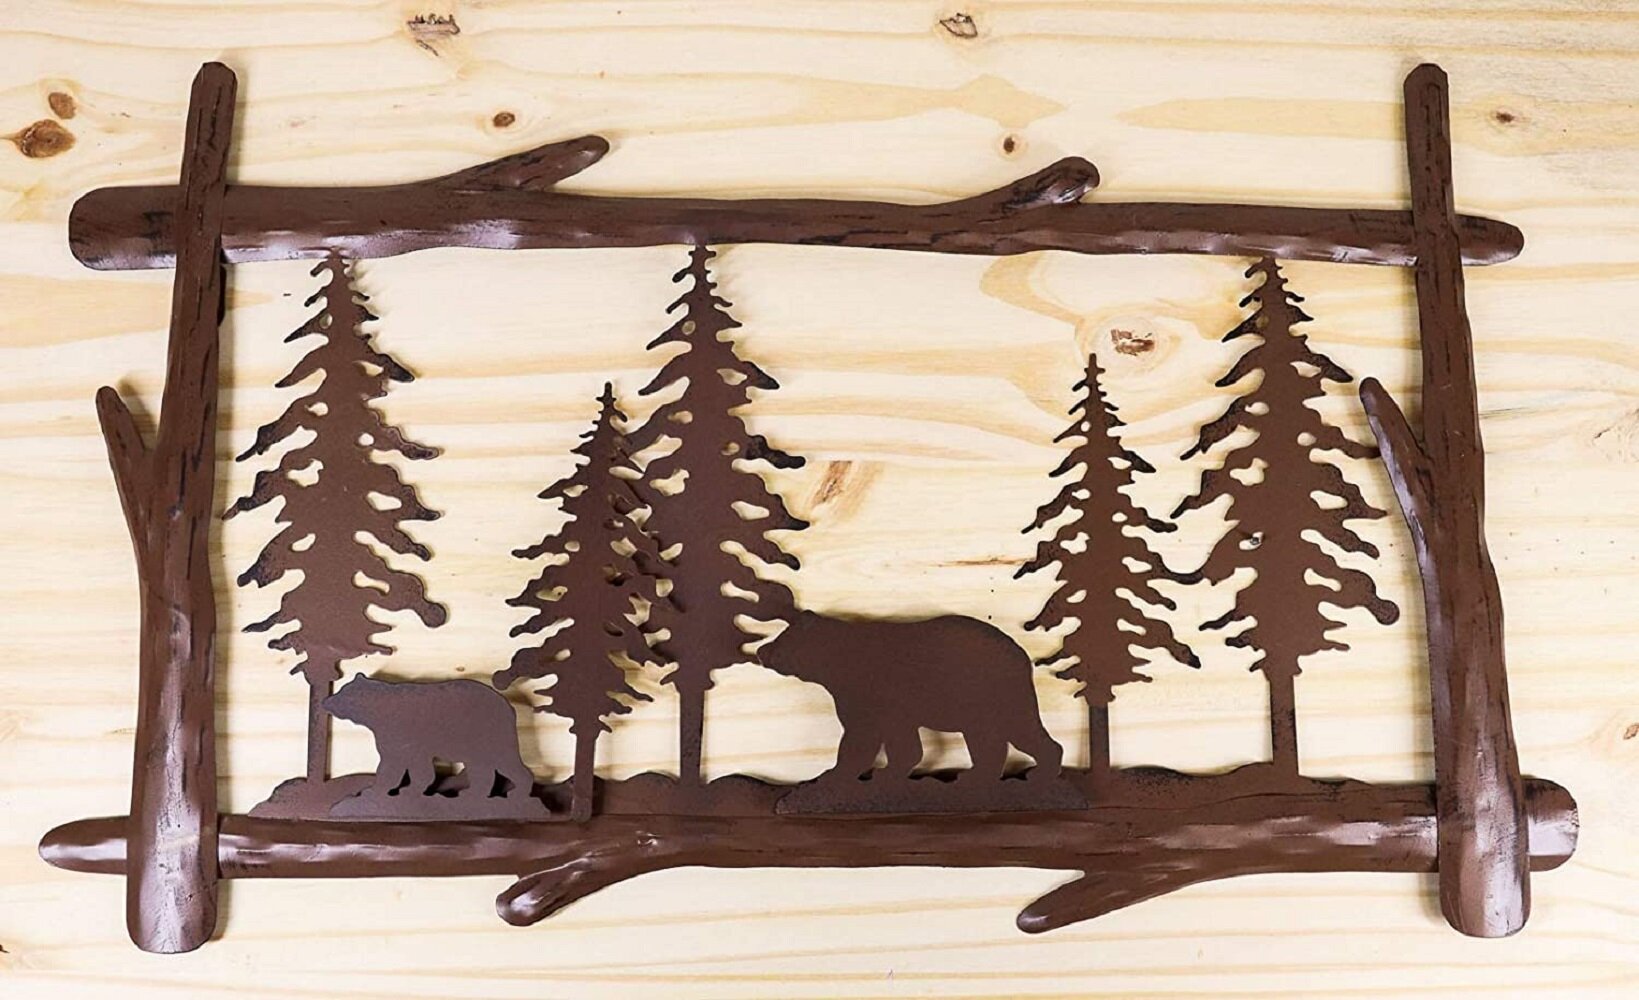 20" BROWN BEAR METAL SCULPTURE SIGN Forest Rustic Lodge Log Cabin Home Decor NEW